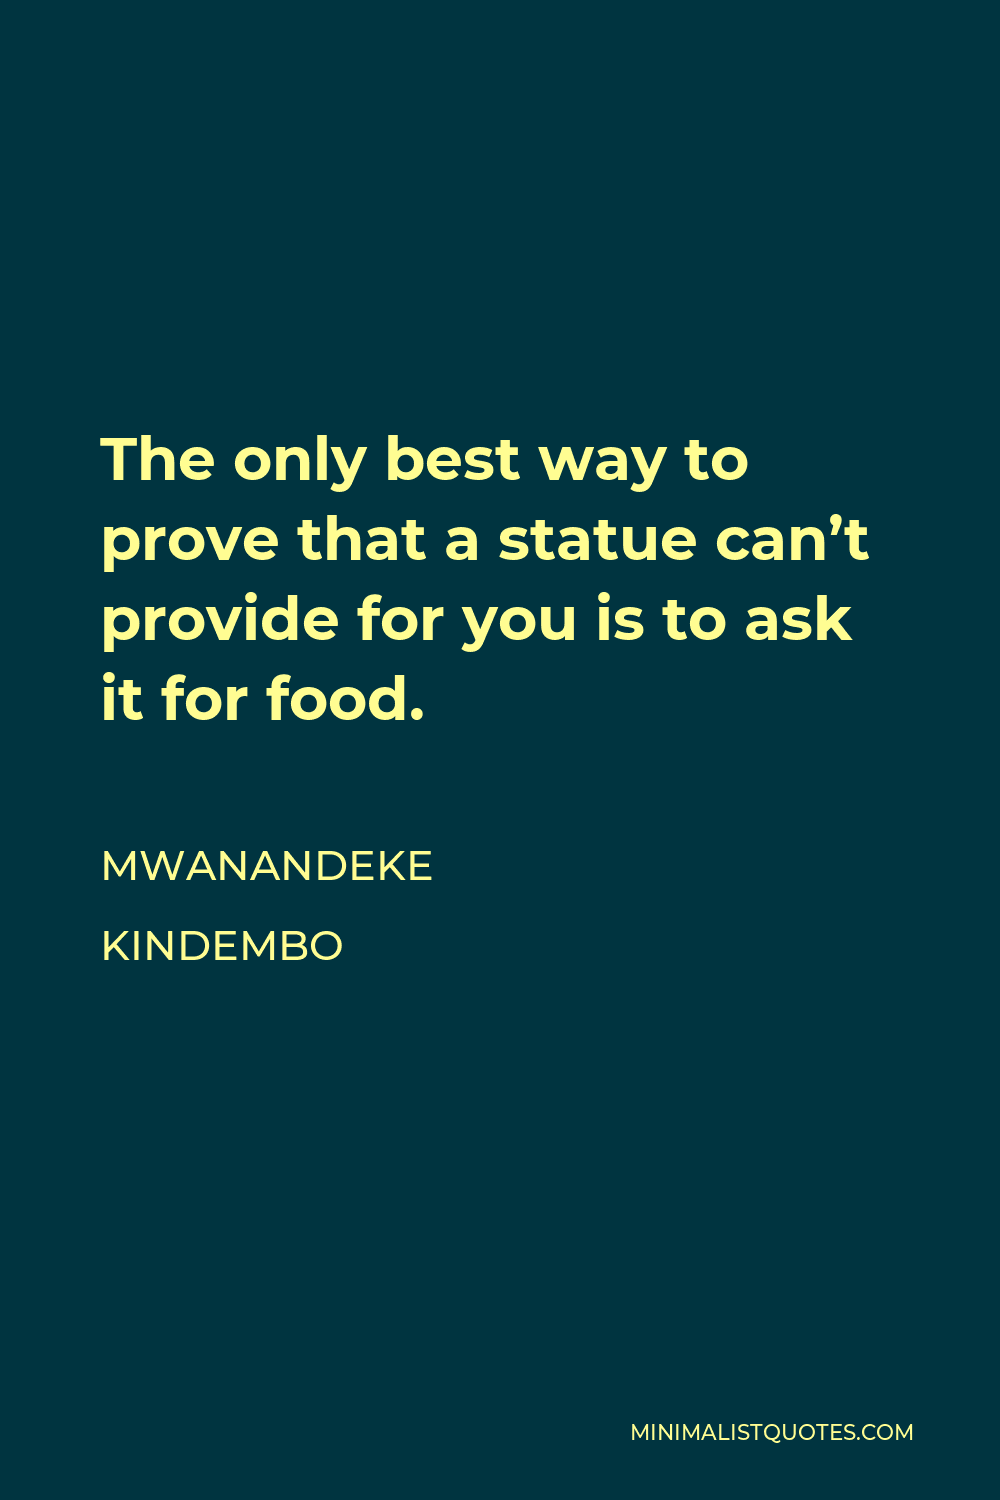 Mwanandeke Kindembo Quote - The only best way to prove that a statue can’t provide for you is to ask it for food.